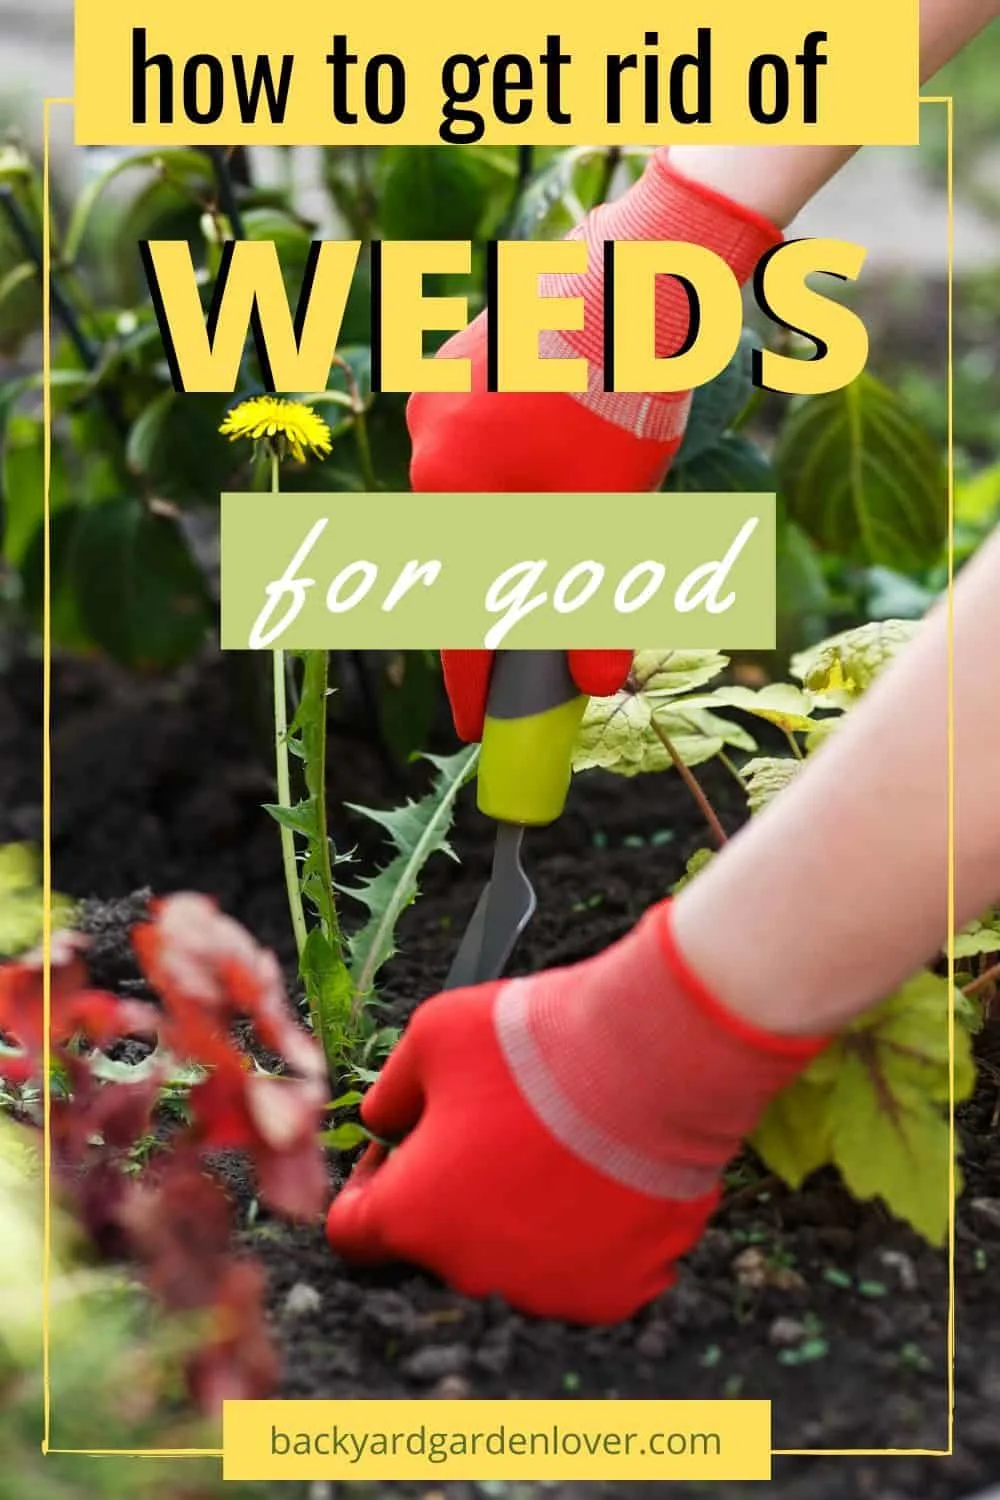 Woman wearing red garden gloves pulling weeds